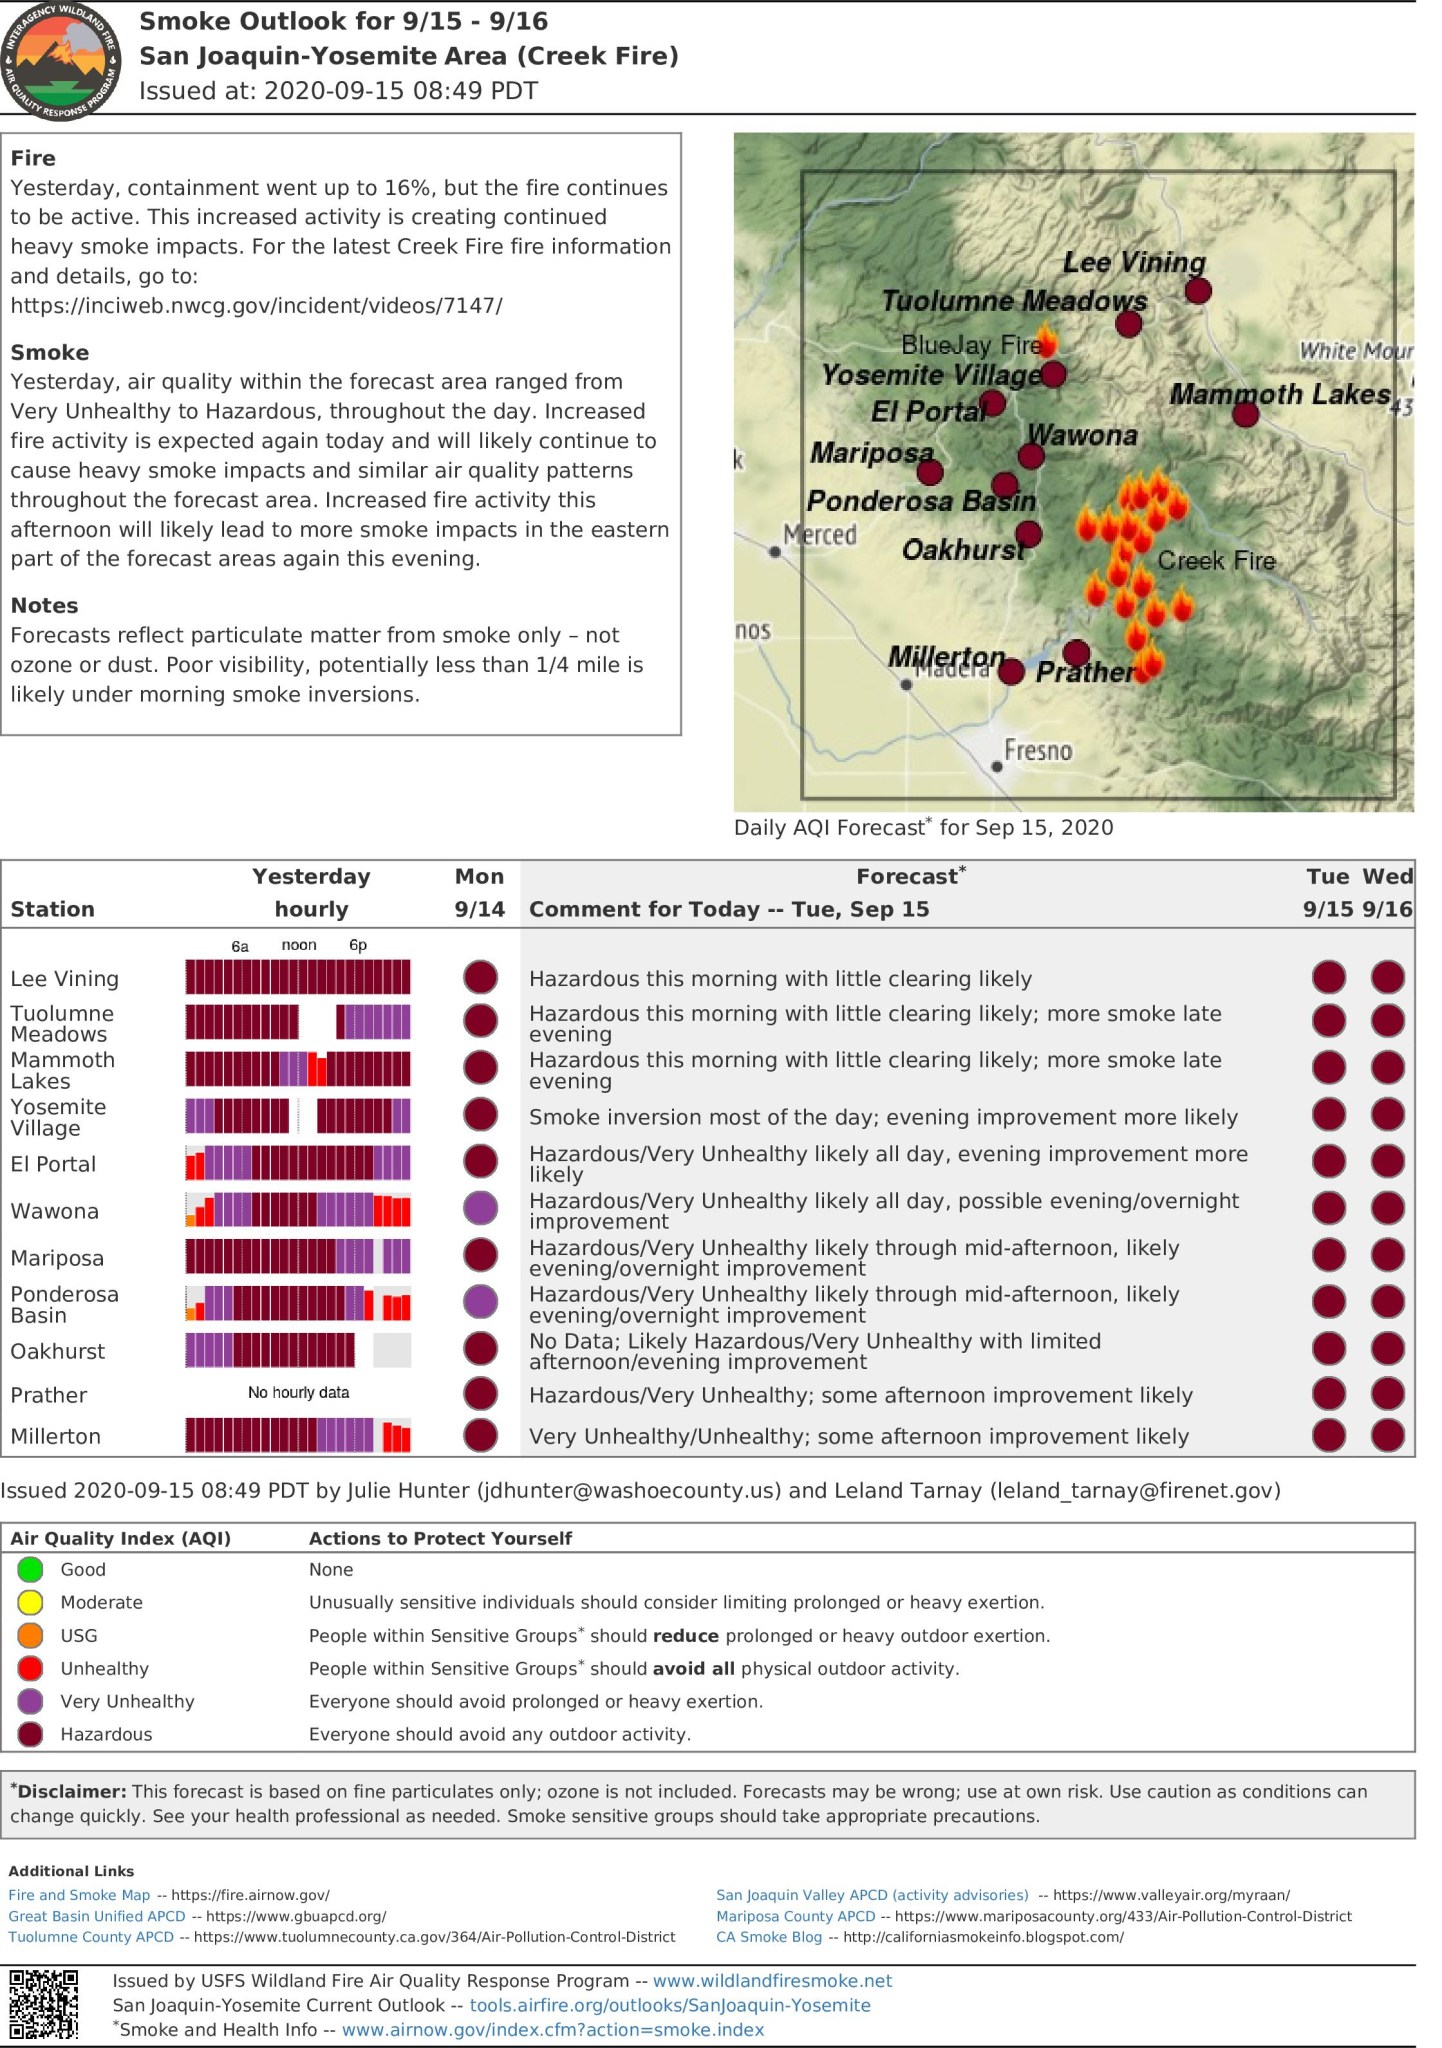 Sample smoke outlook report, with a map and key indicating active fires and air quality.